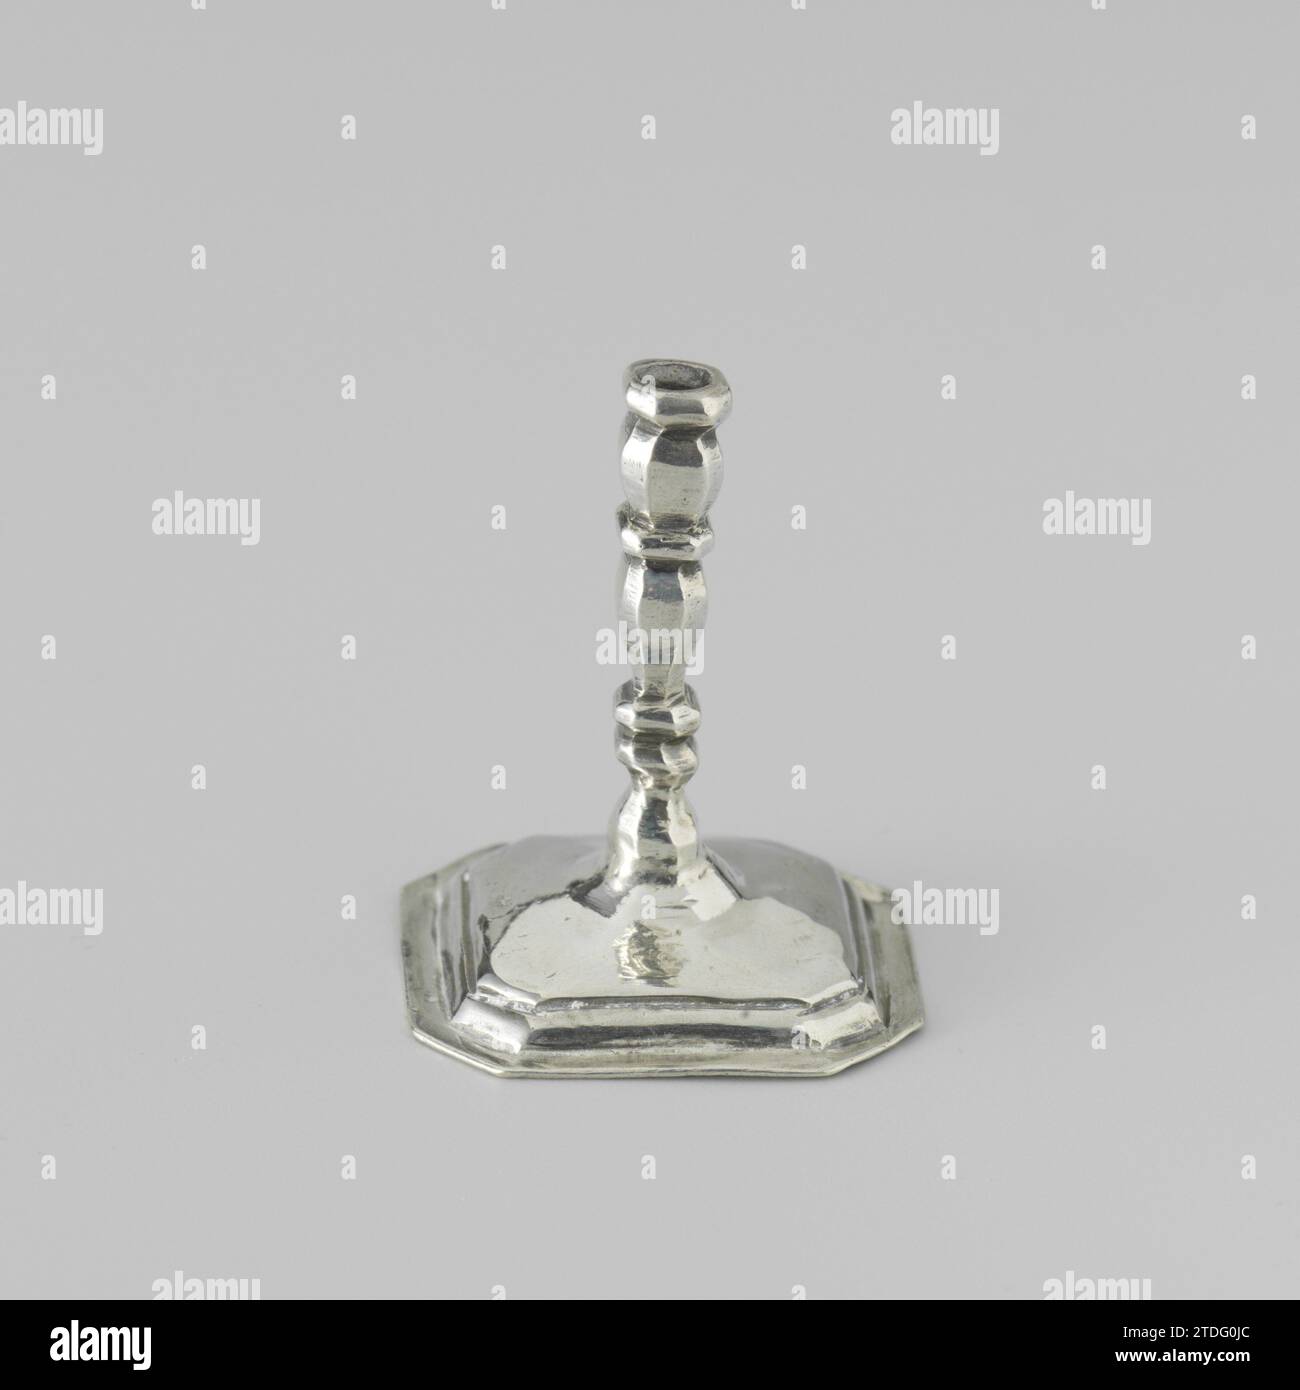 Candlestick, anonymous, c. 1704 - c. 1734 Candlestick on a square, curved foot with beveled corners. The trunk of the candlestick and the edge of the foot are profiled. The candlestick is marked: stk. = Amsterdam, Mt. = Citroen 1975, no. 970 and an ax. The candlestick is the same as the candlestick with invnr. BK-NM-4329. Amsterdam silver (metal) Candlestick on a square, curved foot with beveled corners. The trunk of the candlestick and the edge of the foot are profiled. The candlestick is marked: stk. = Amsterdam, Mt. = Citroen 1975, no. 970 and an ax. The candlestick is the same as the candl Stock Photo